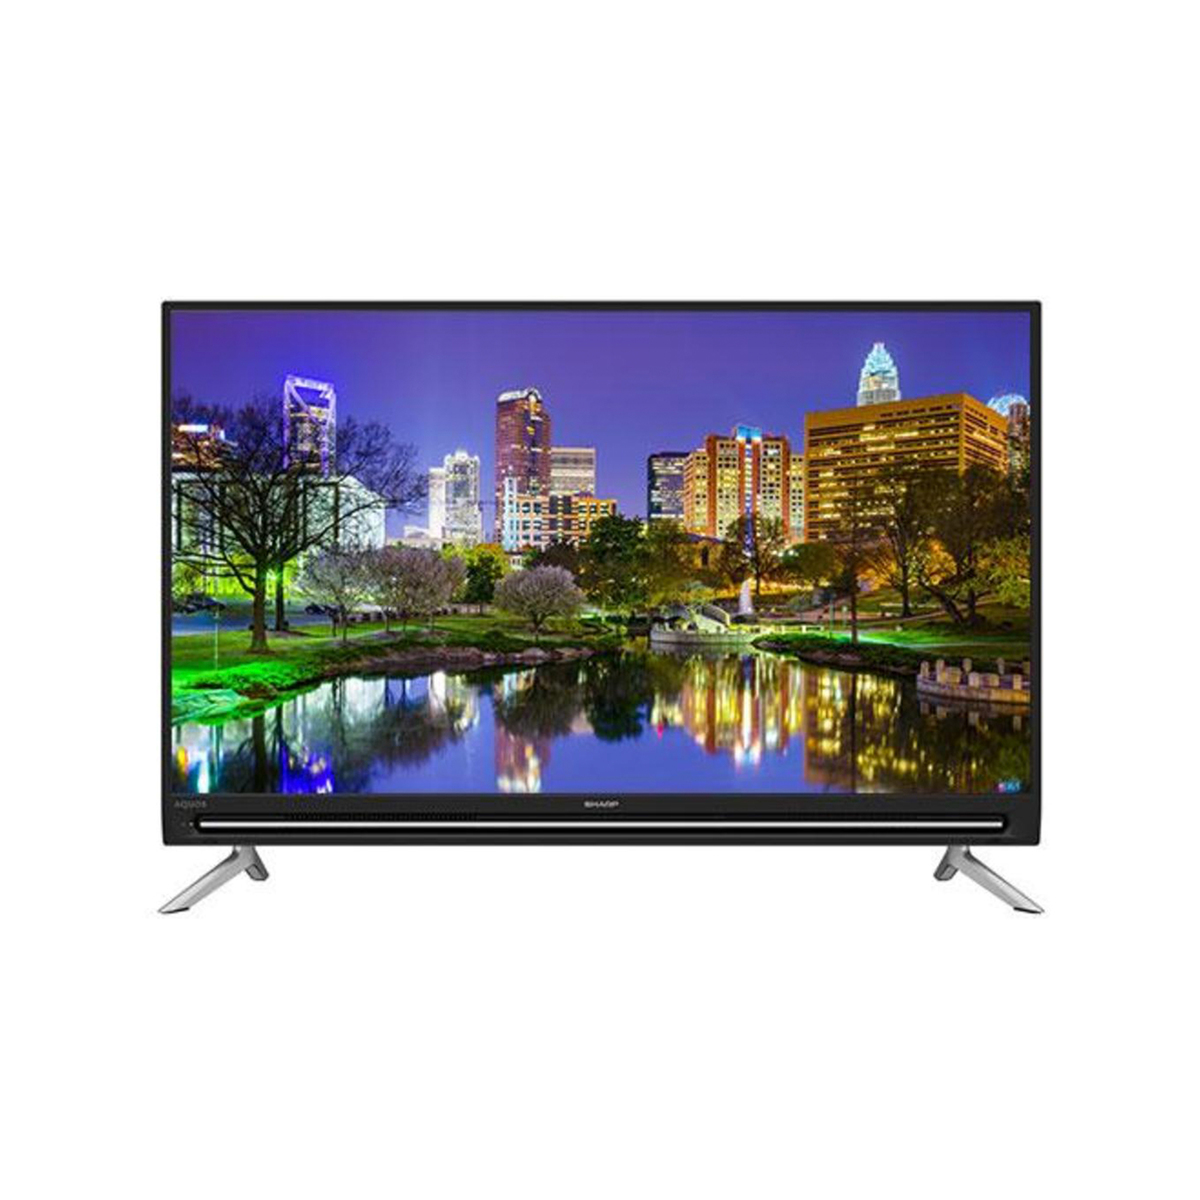 Sharp Smart LED TV LC40LE5500X 40inch Online at Best Price